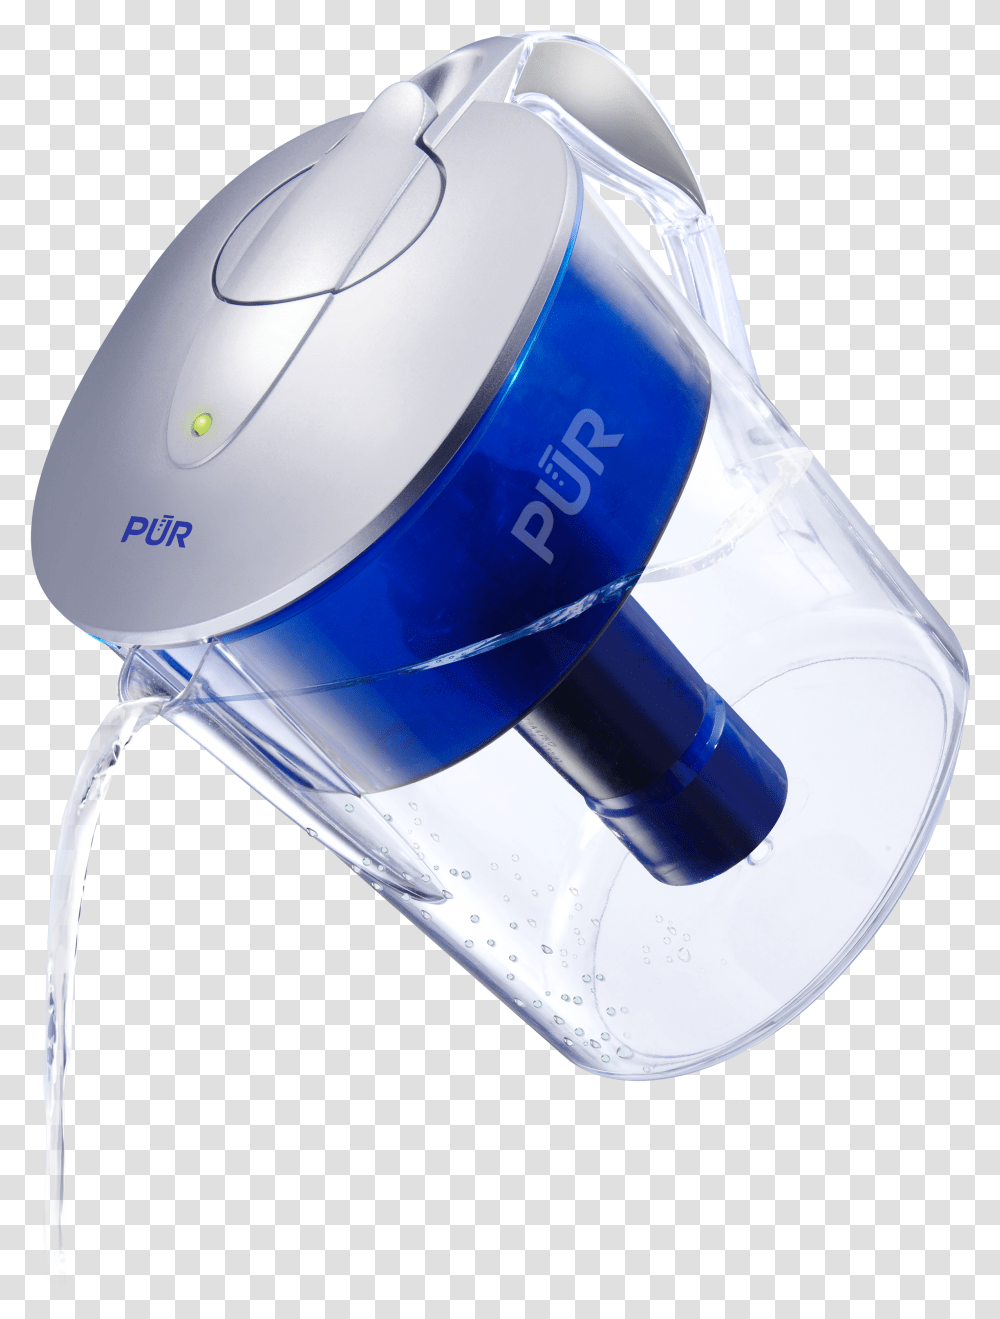 Pur Water Pitcher Brita Pitcher Pouring Transparent Png